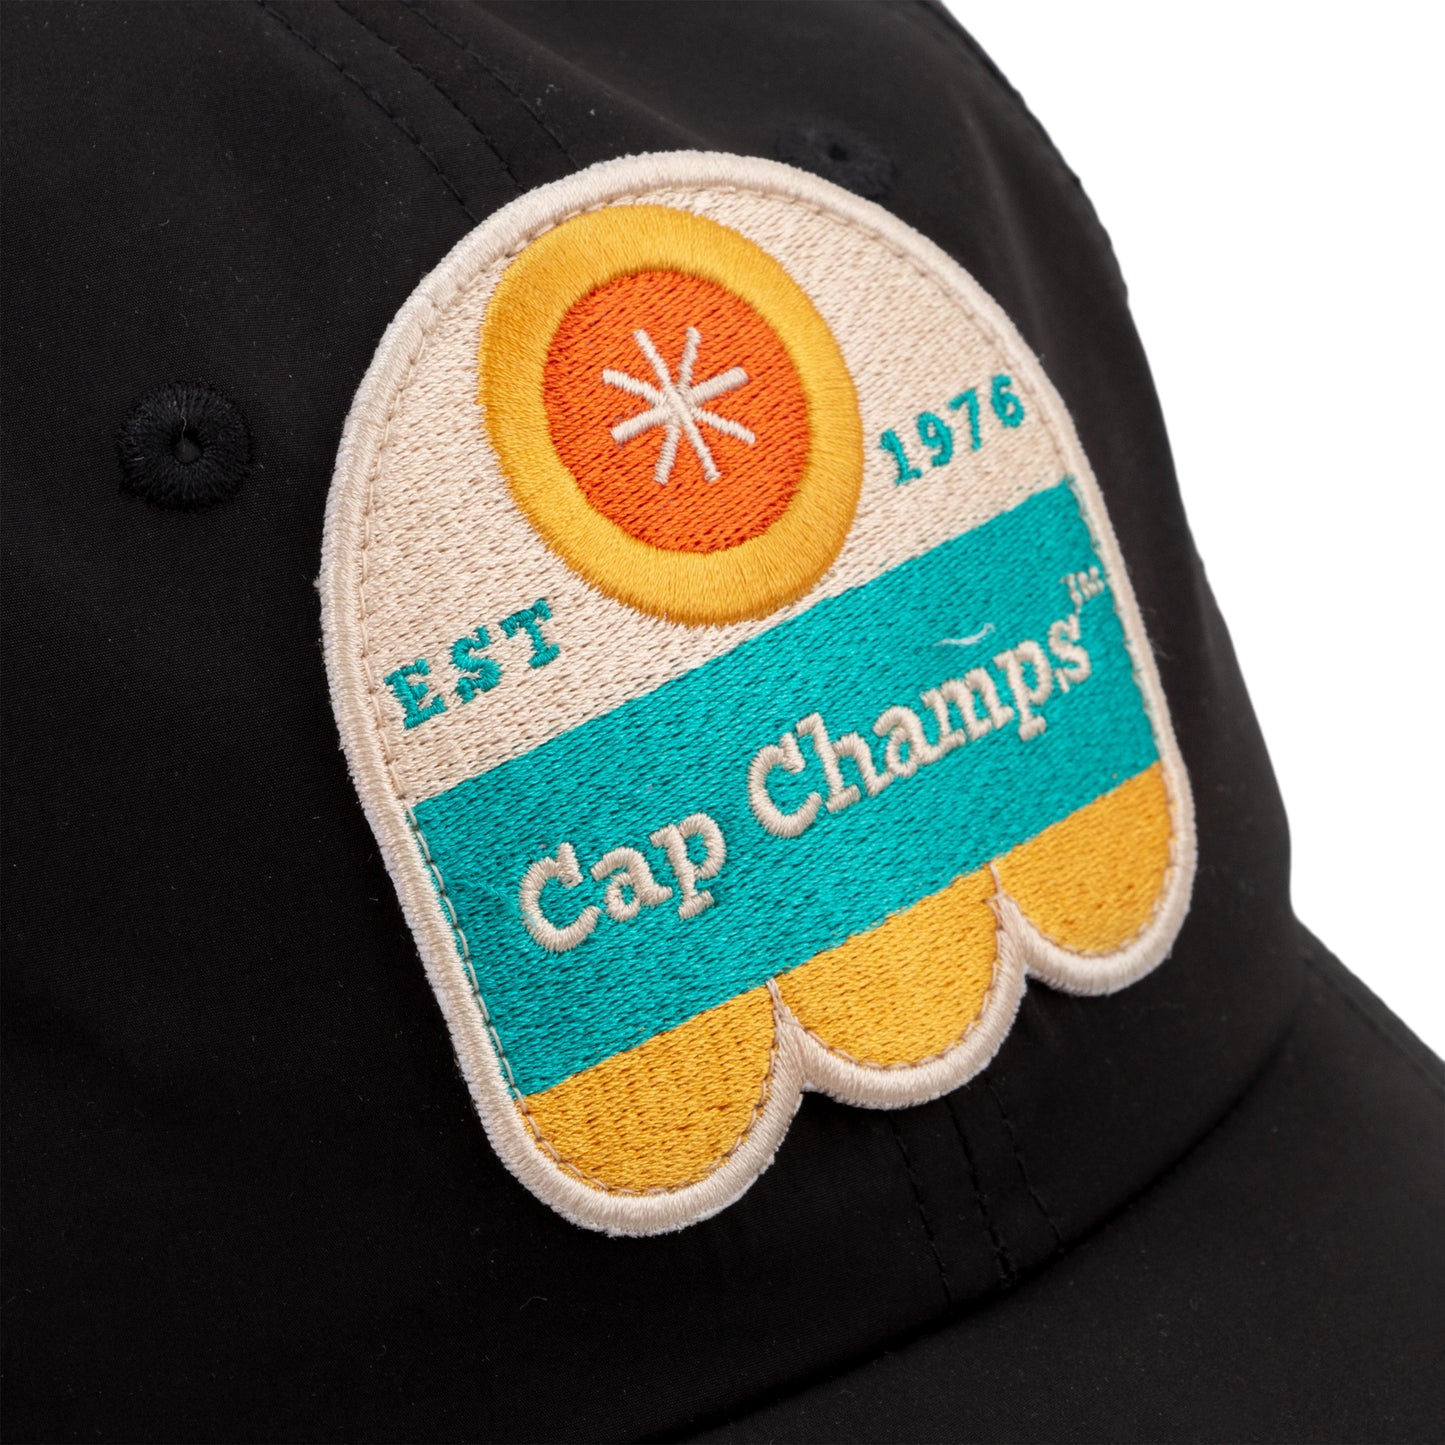 Classic Fit Breathable Relaxed Dad Cap